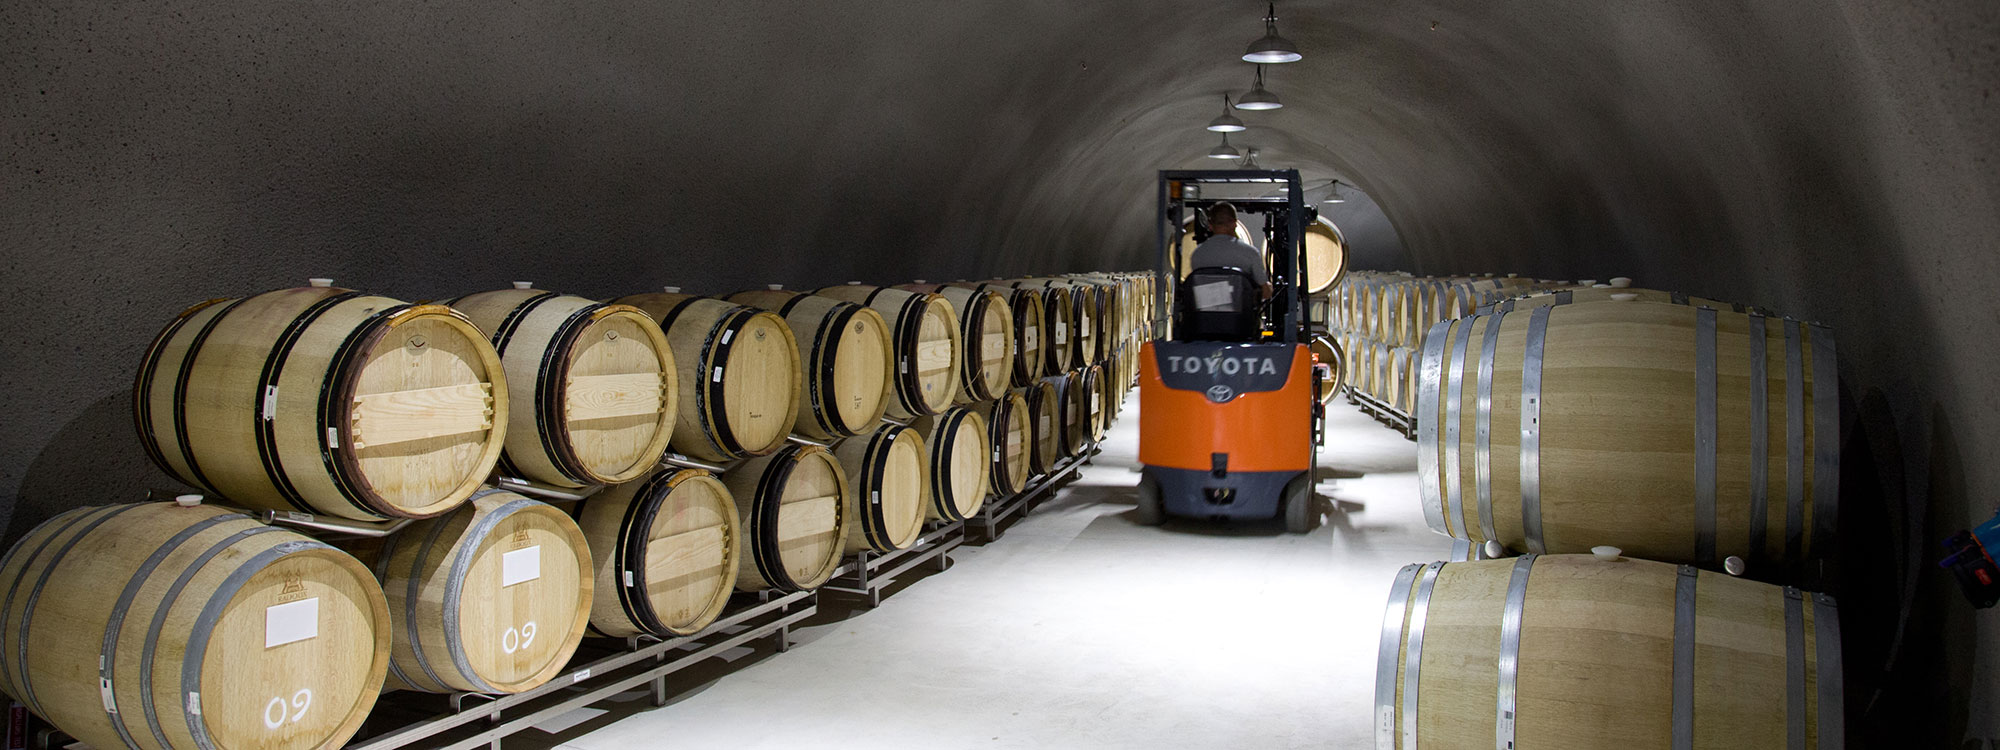 Winery Storage Caves Builder - Paso Robles, CA - JW Design & Construction